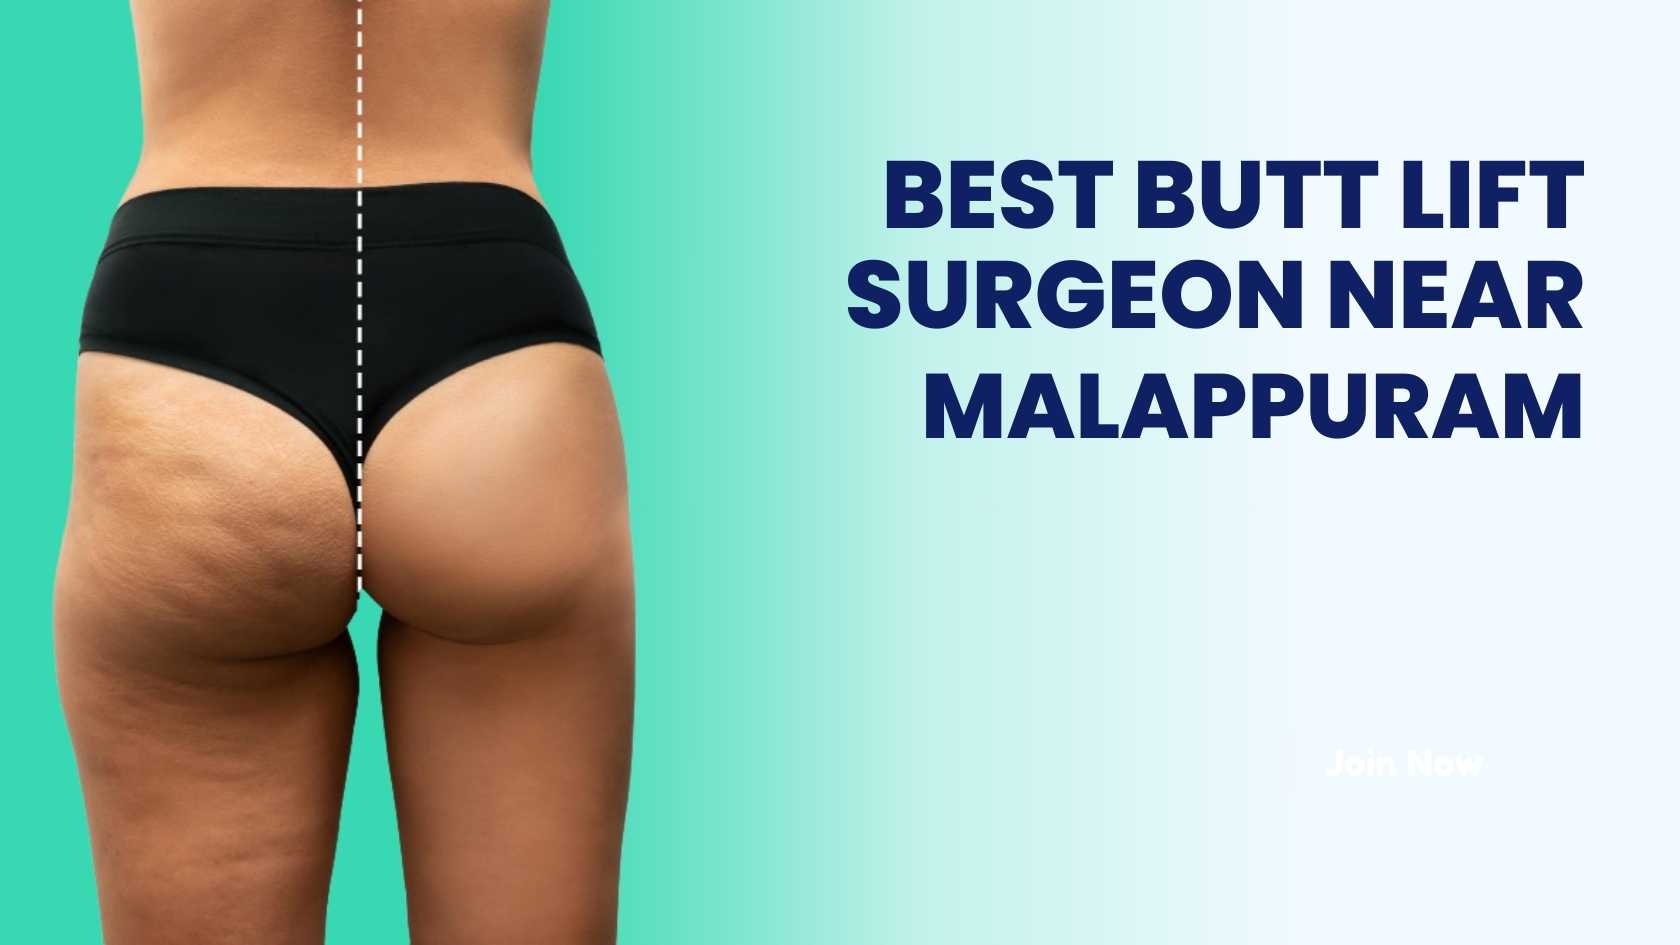 Dr. Prince specializes in butt lift surgeries near Malappuram